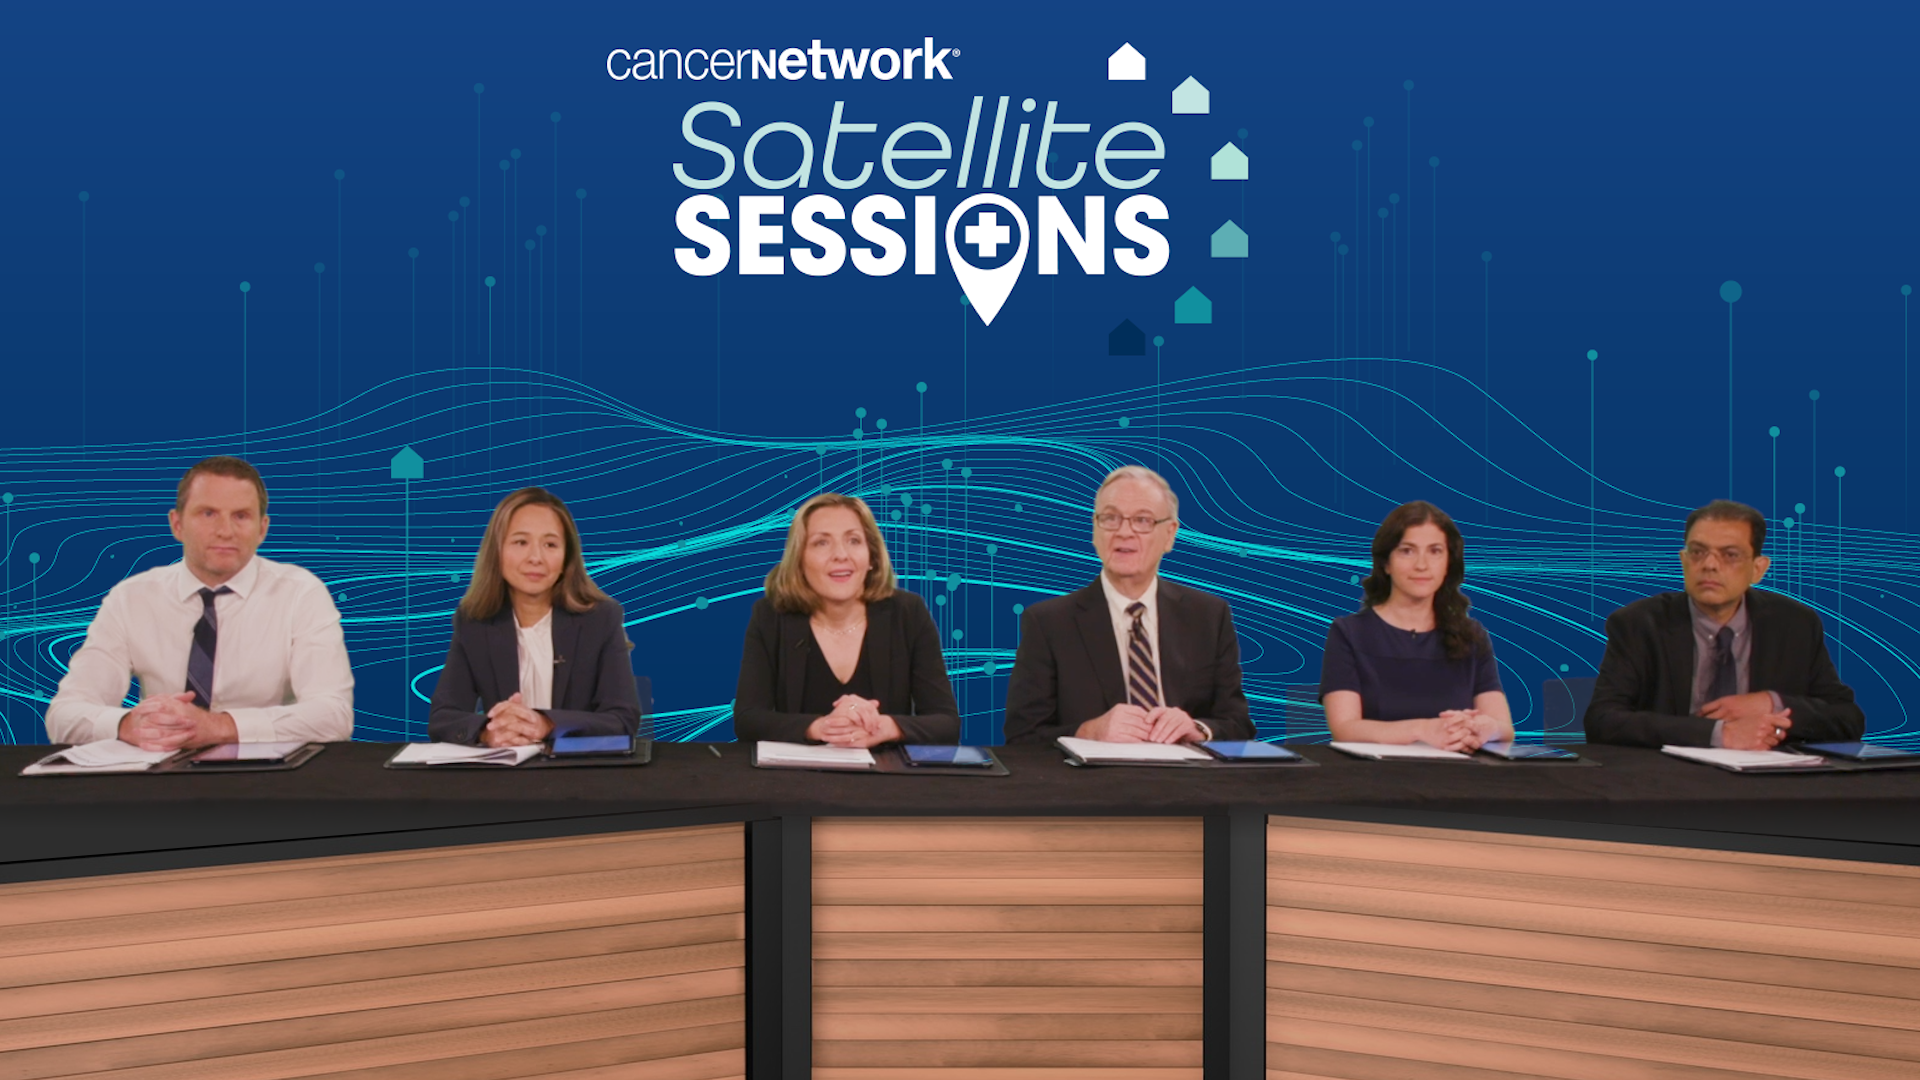 Treatment of Multiple Myeloma: Q&A Session With Yale Cancer Center and Satellites